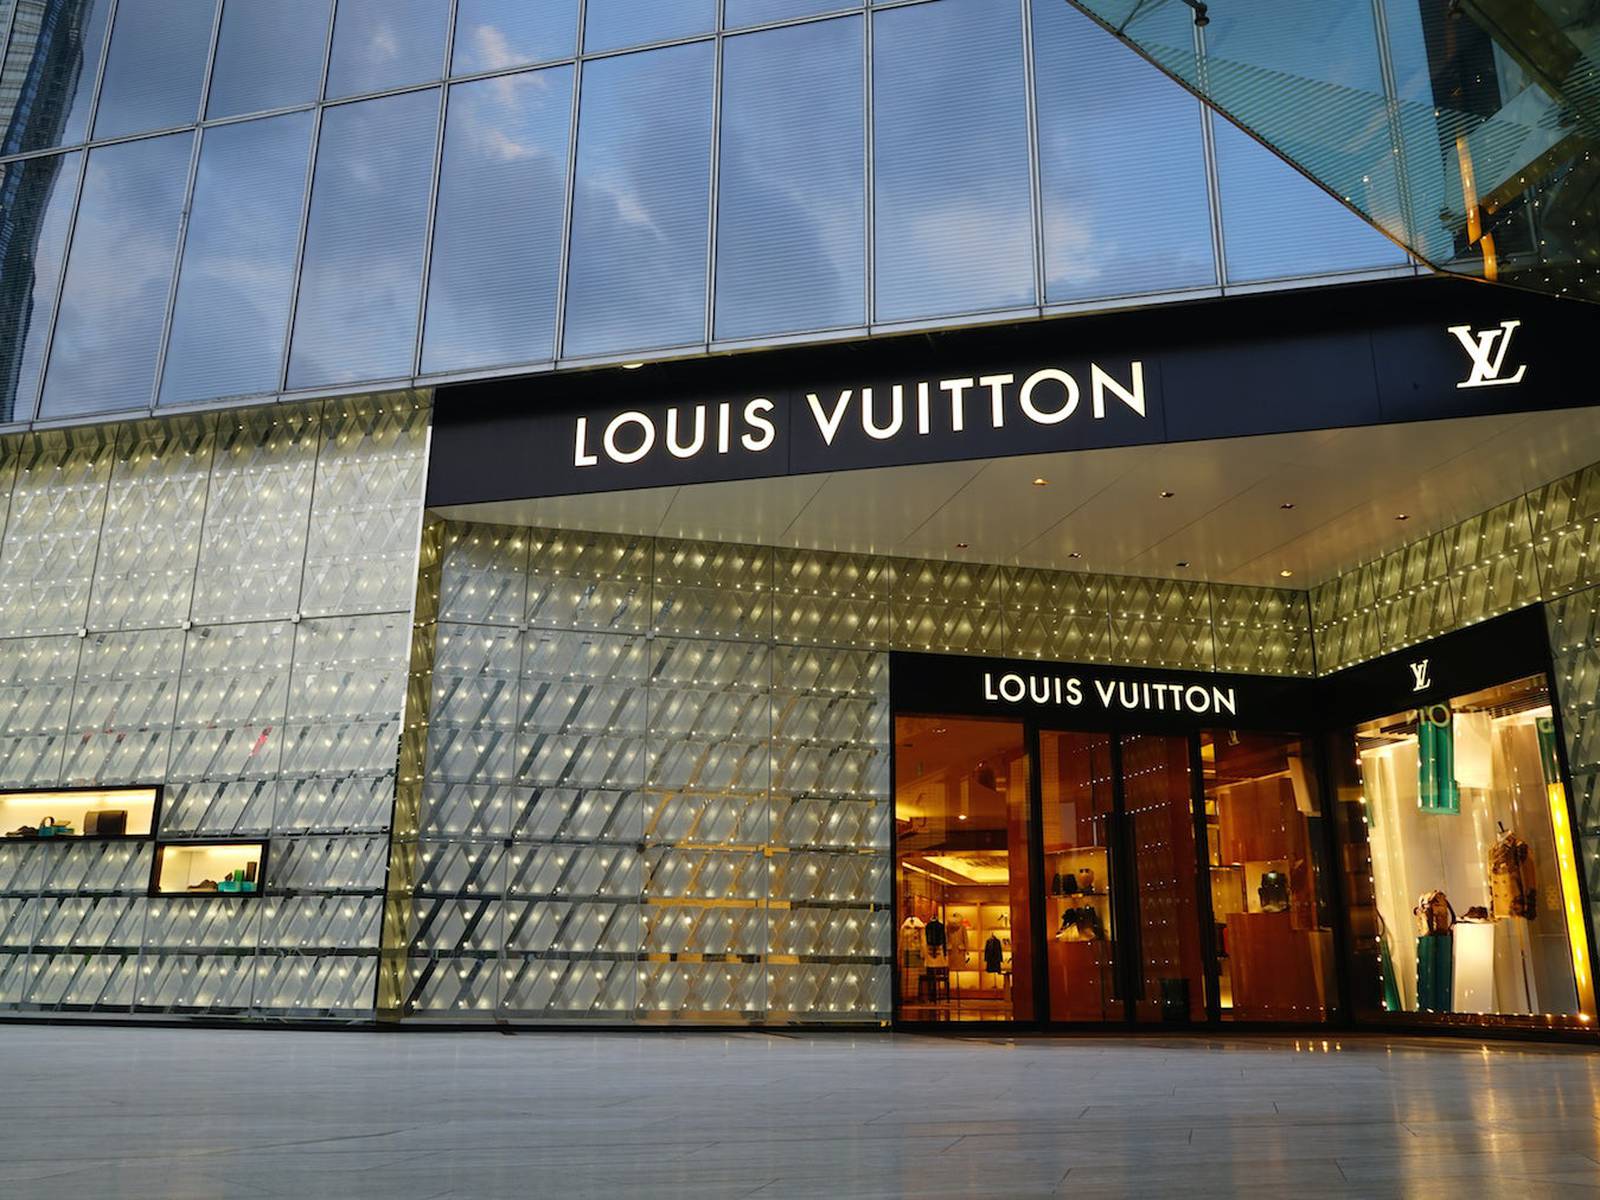 LVMH Shares Surge as Fashion Brands Overcome Asian Blues